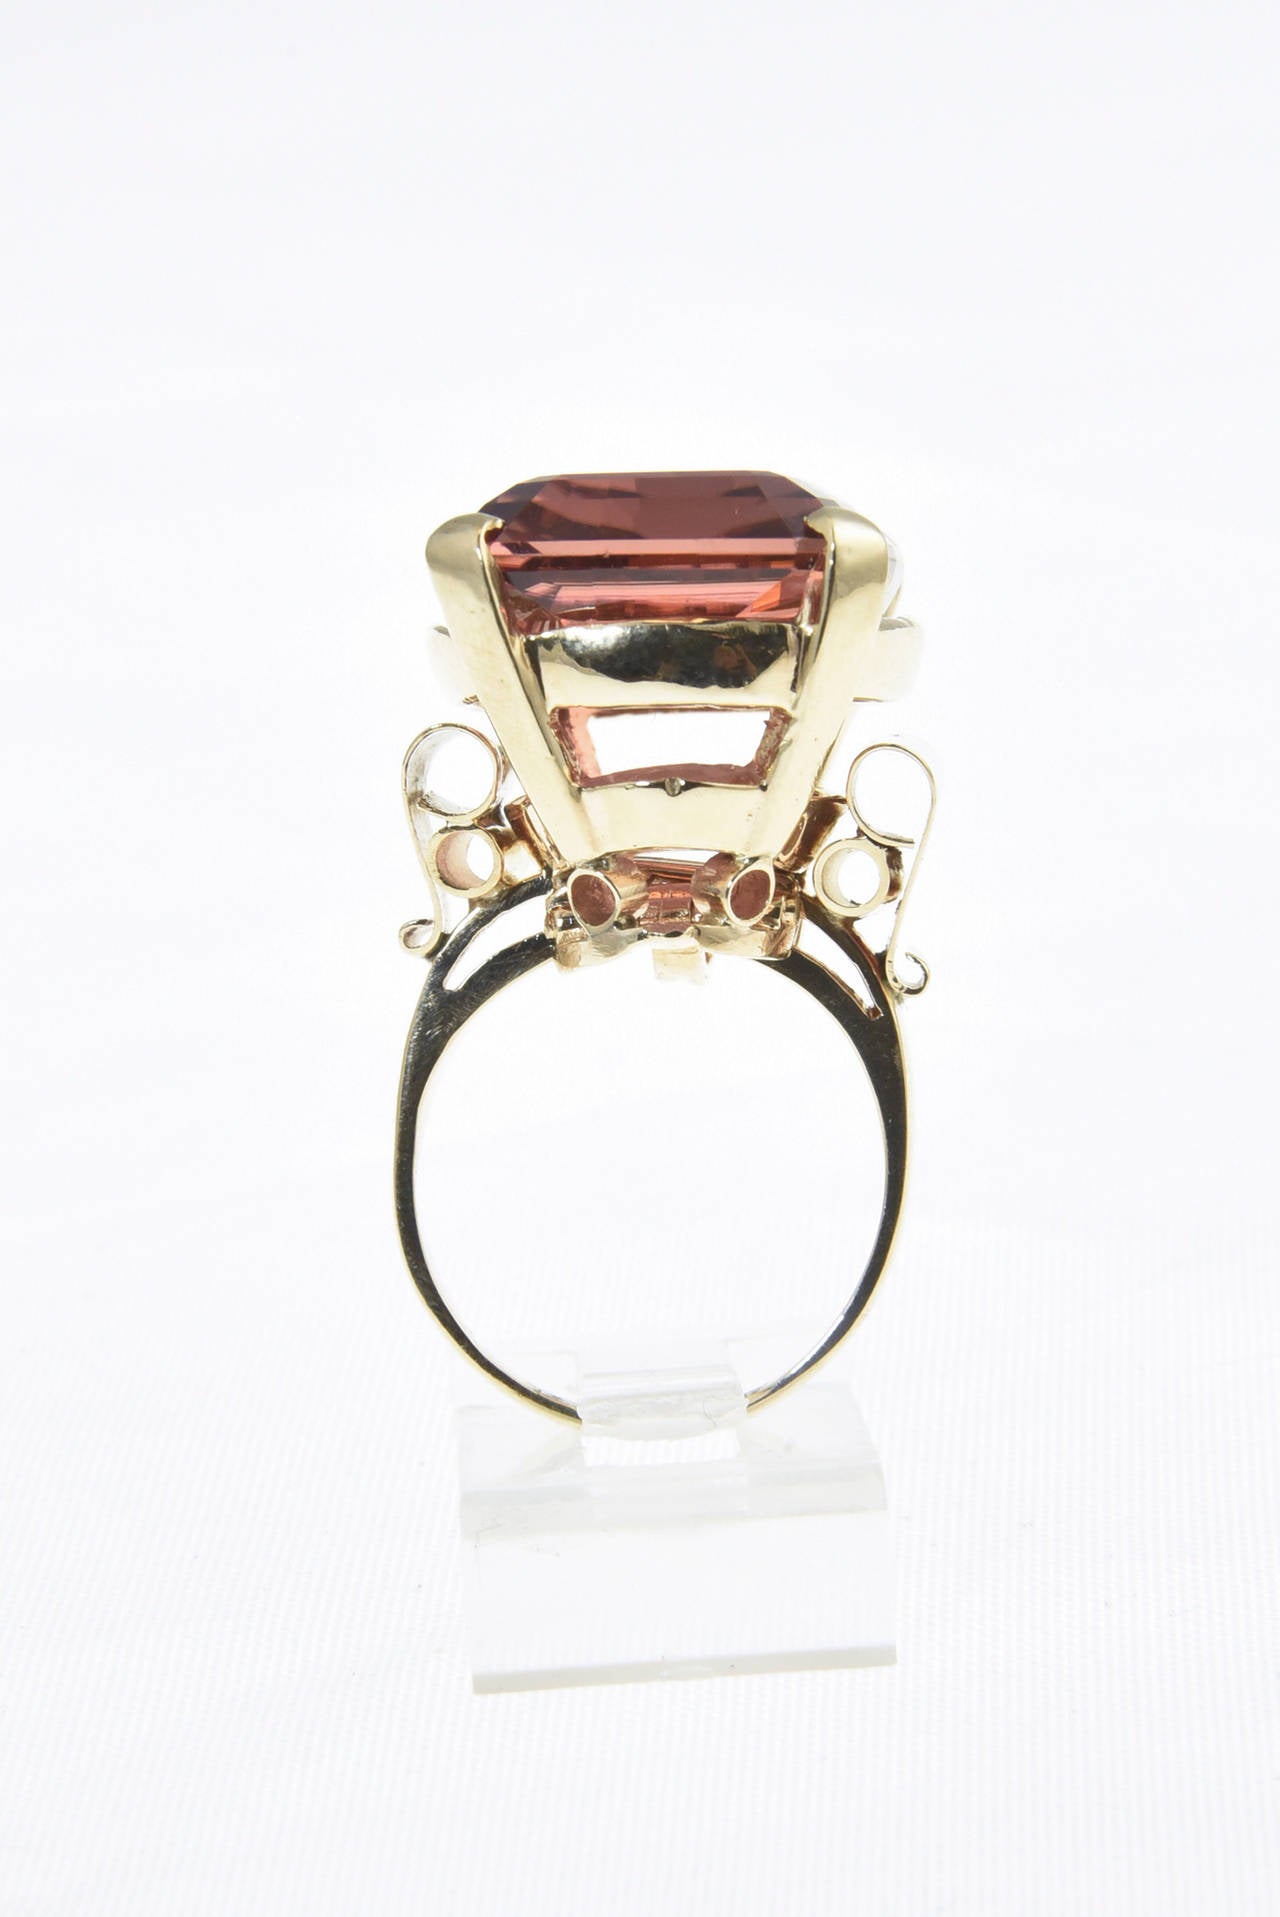 The Tourmaline is exquisite. The stone weights just over 32c.  It is a clean stone with a lovely rare color.  The 14k yellow gold mounting as scroll shoulders.

US size 7.25.  It can be sized.